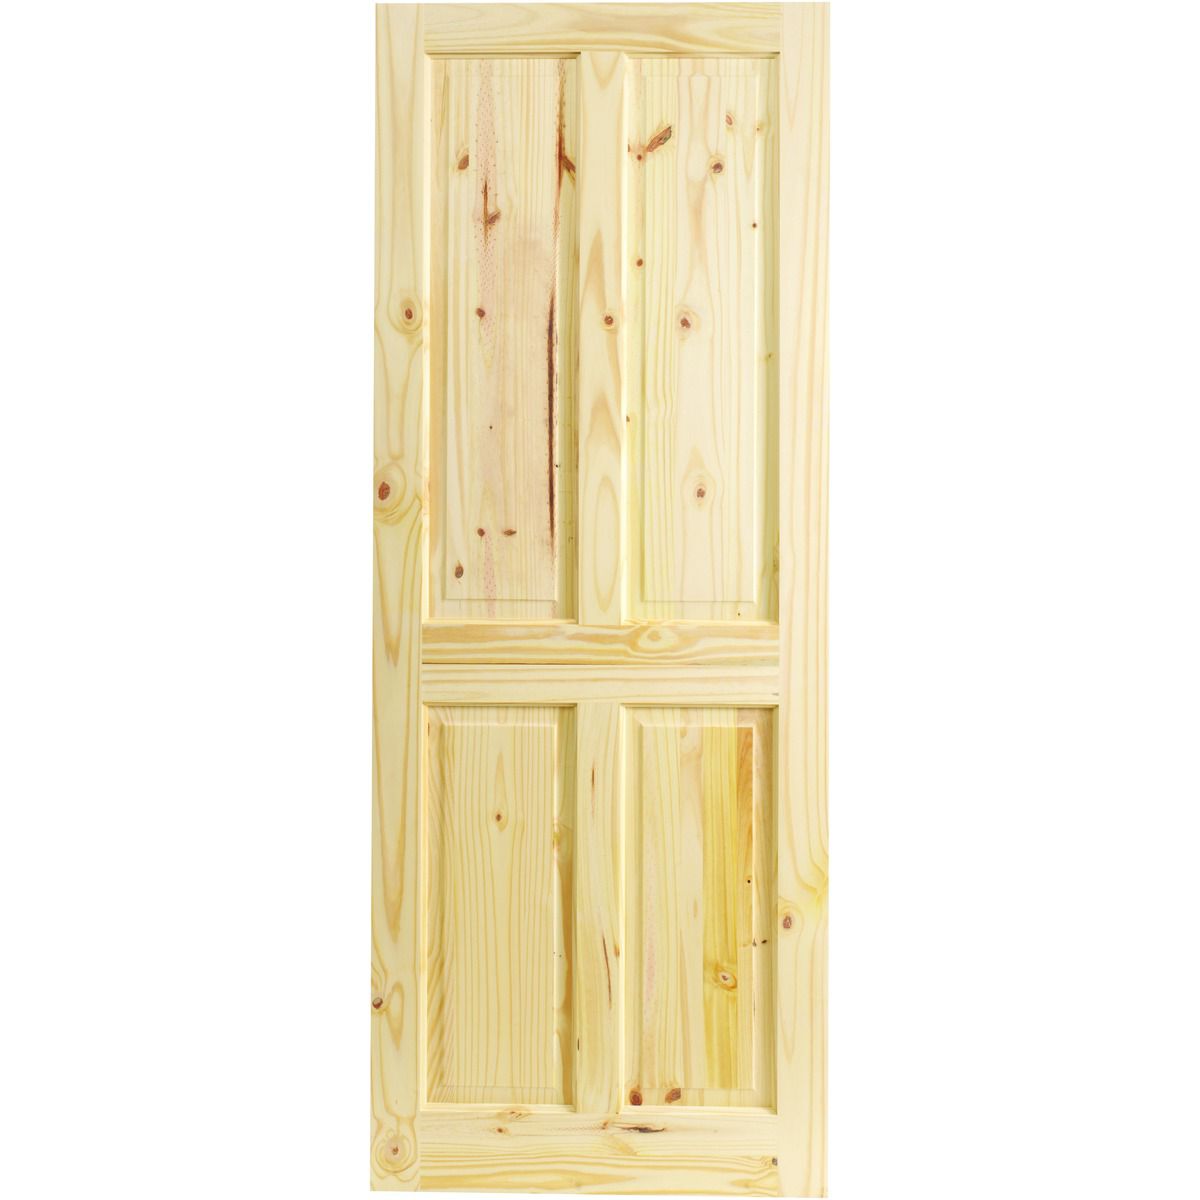 Image of Wickes Chester Knotty Pine 4 Panel Internal Door - 1981 x 838mm